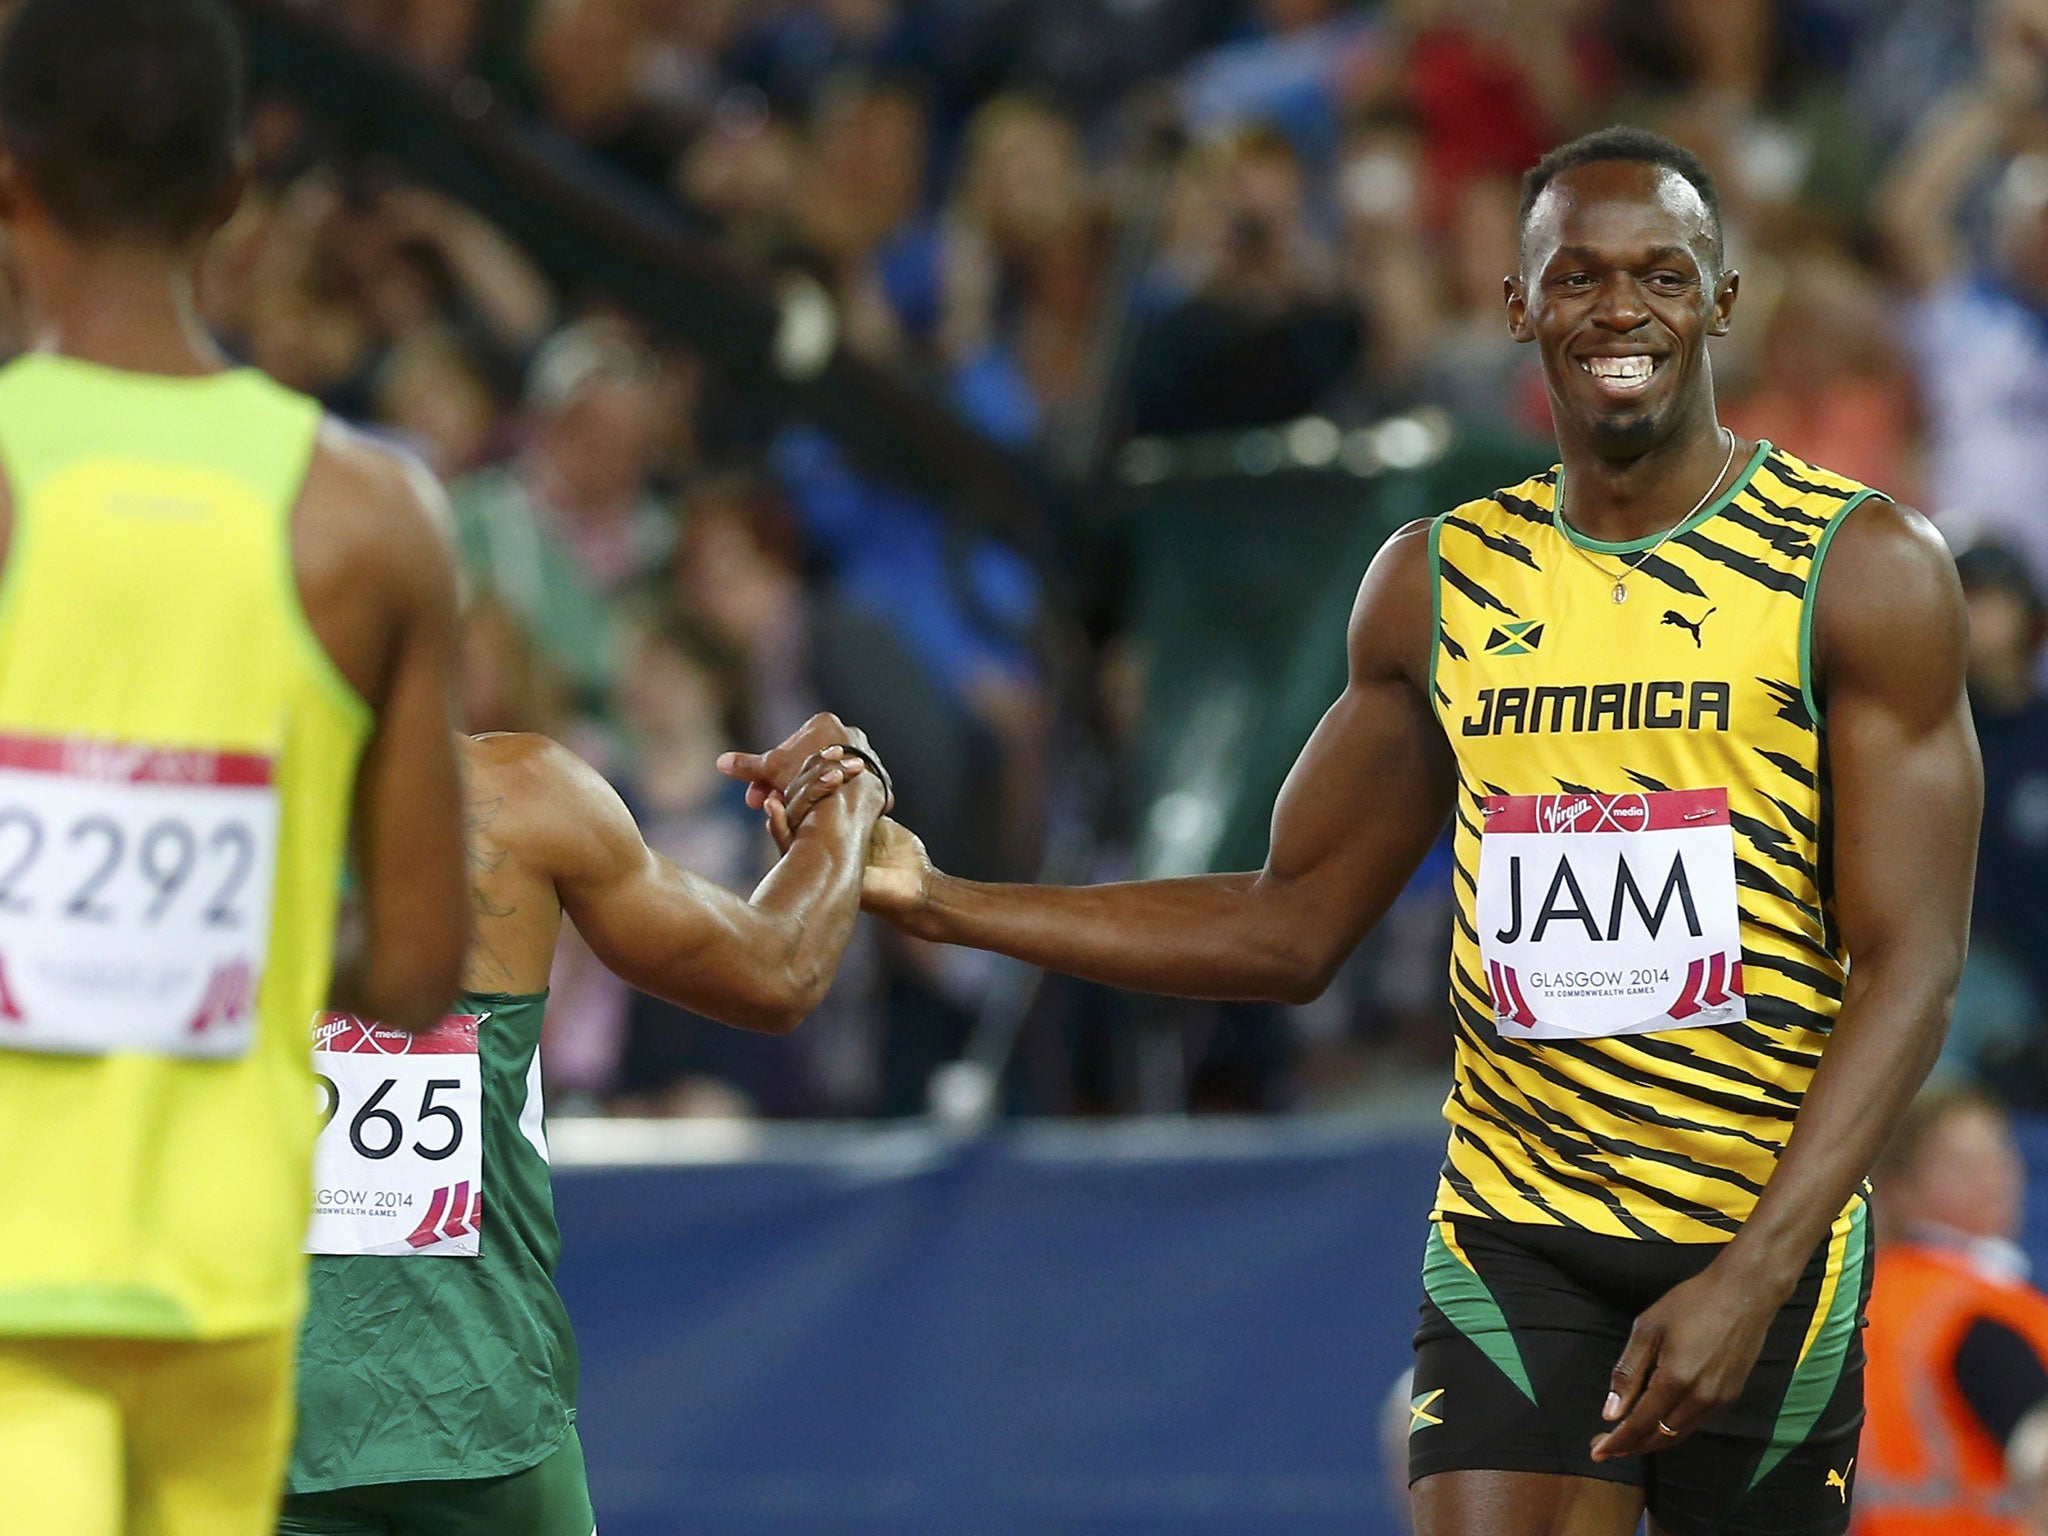 Usain Bolt of Jamaica smiles and shakes hands with a competitor after Jamaica won their first heat in the men's 4x100m relay